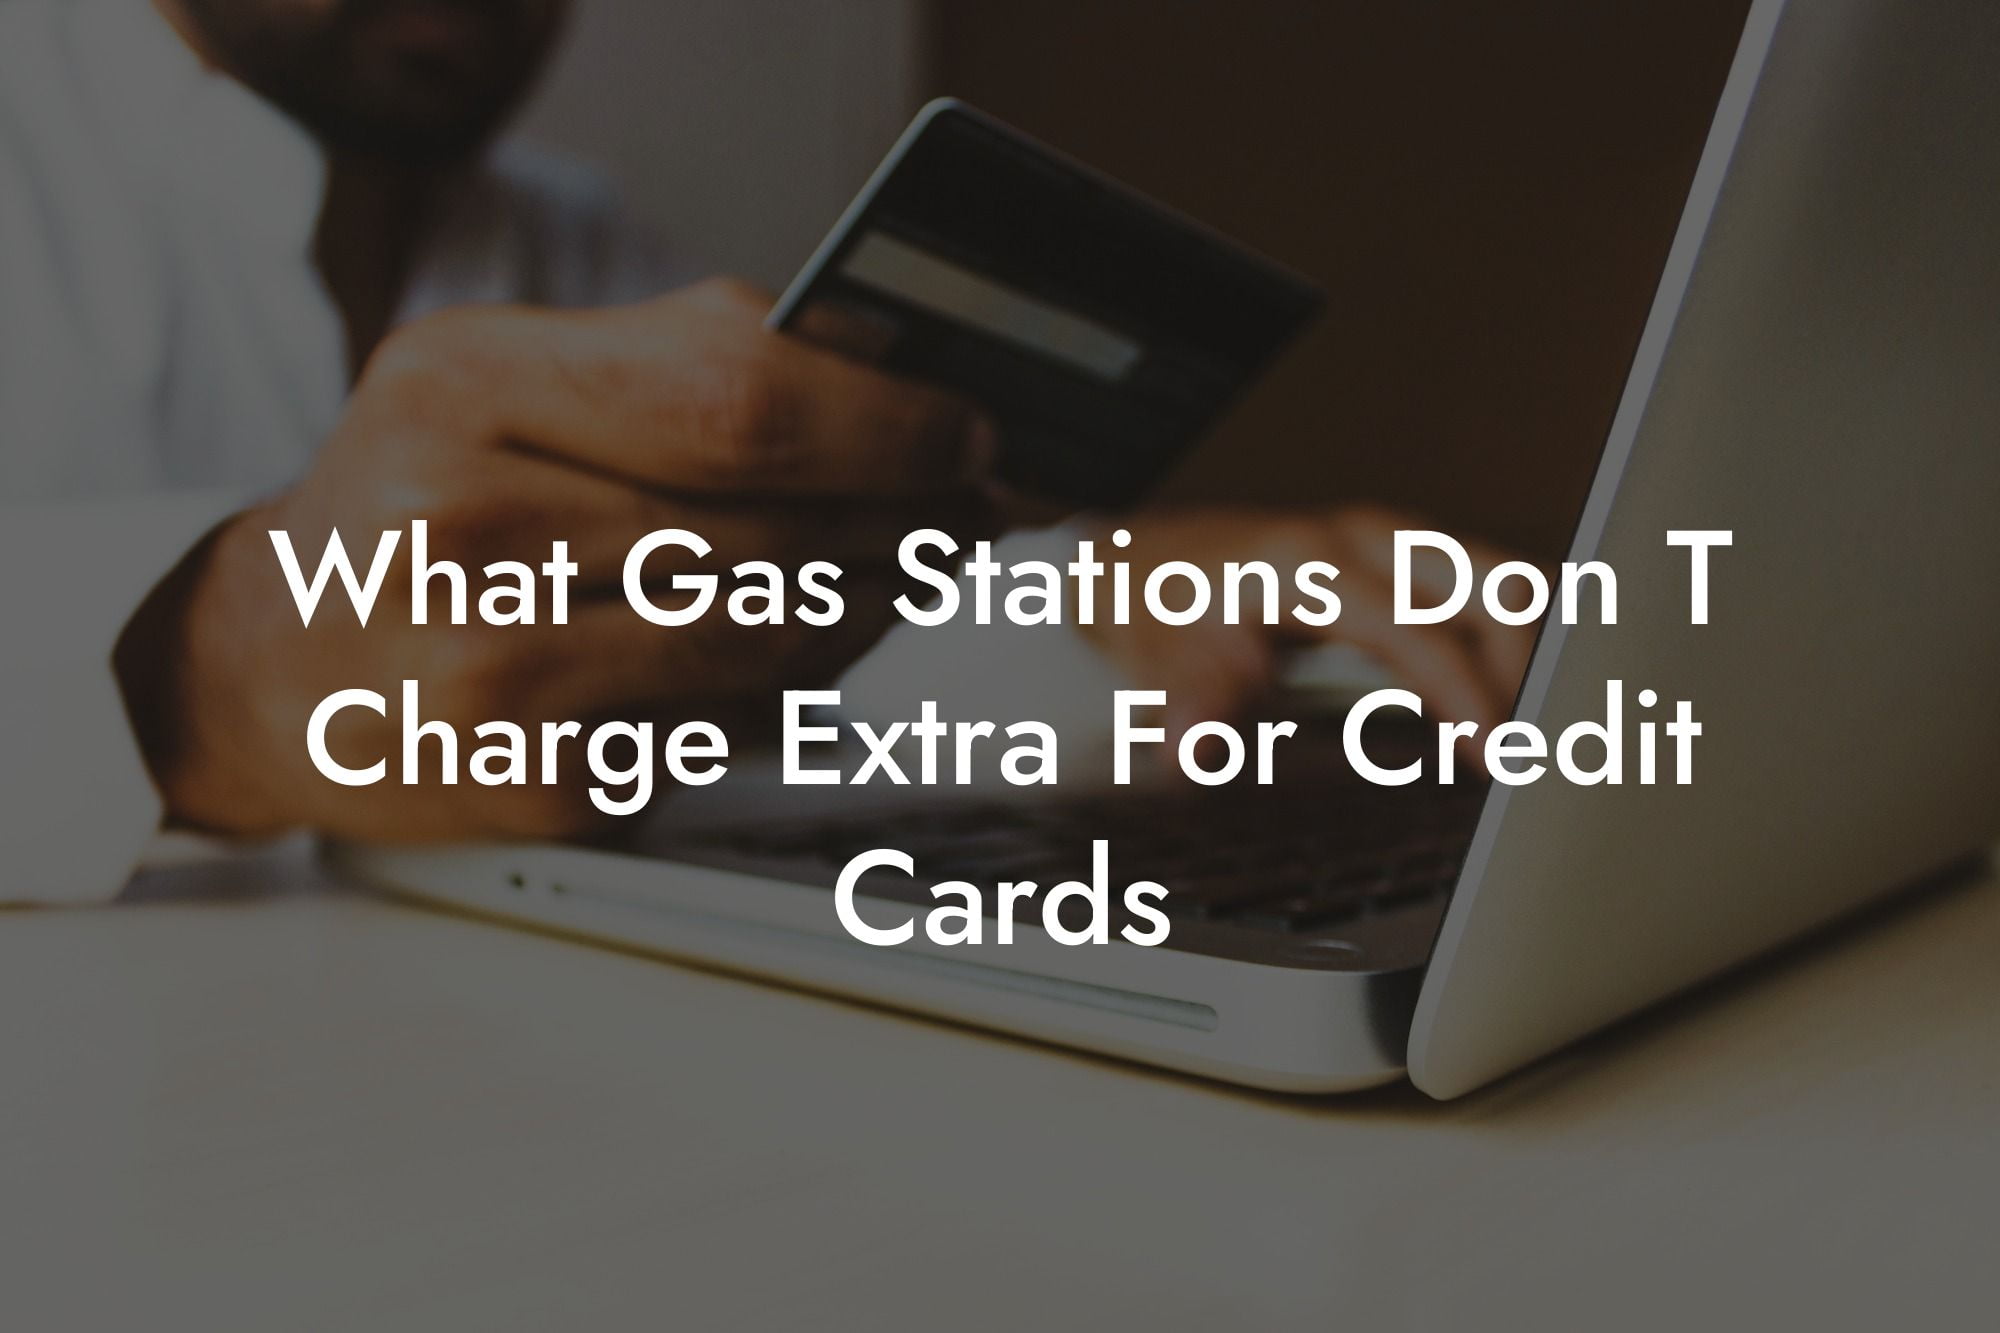 What Gas Stations Don T Charge Extra For Credit Cards